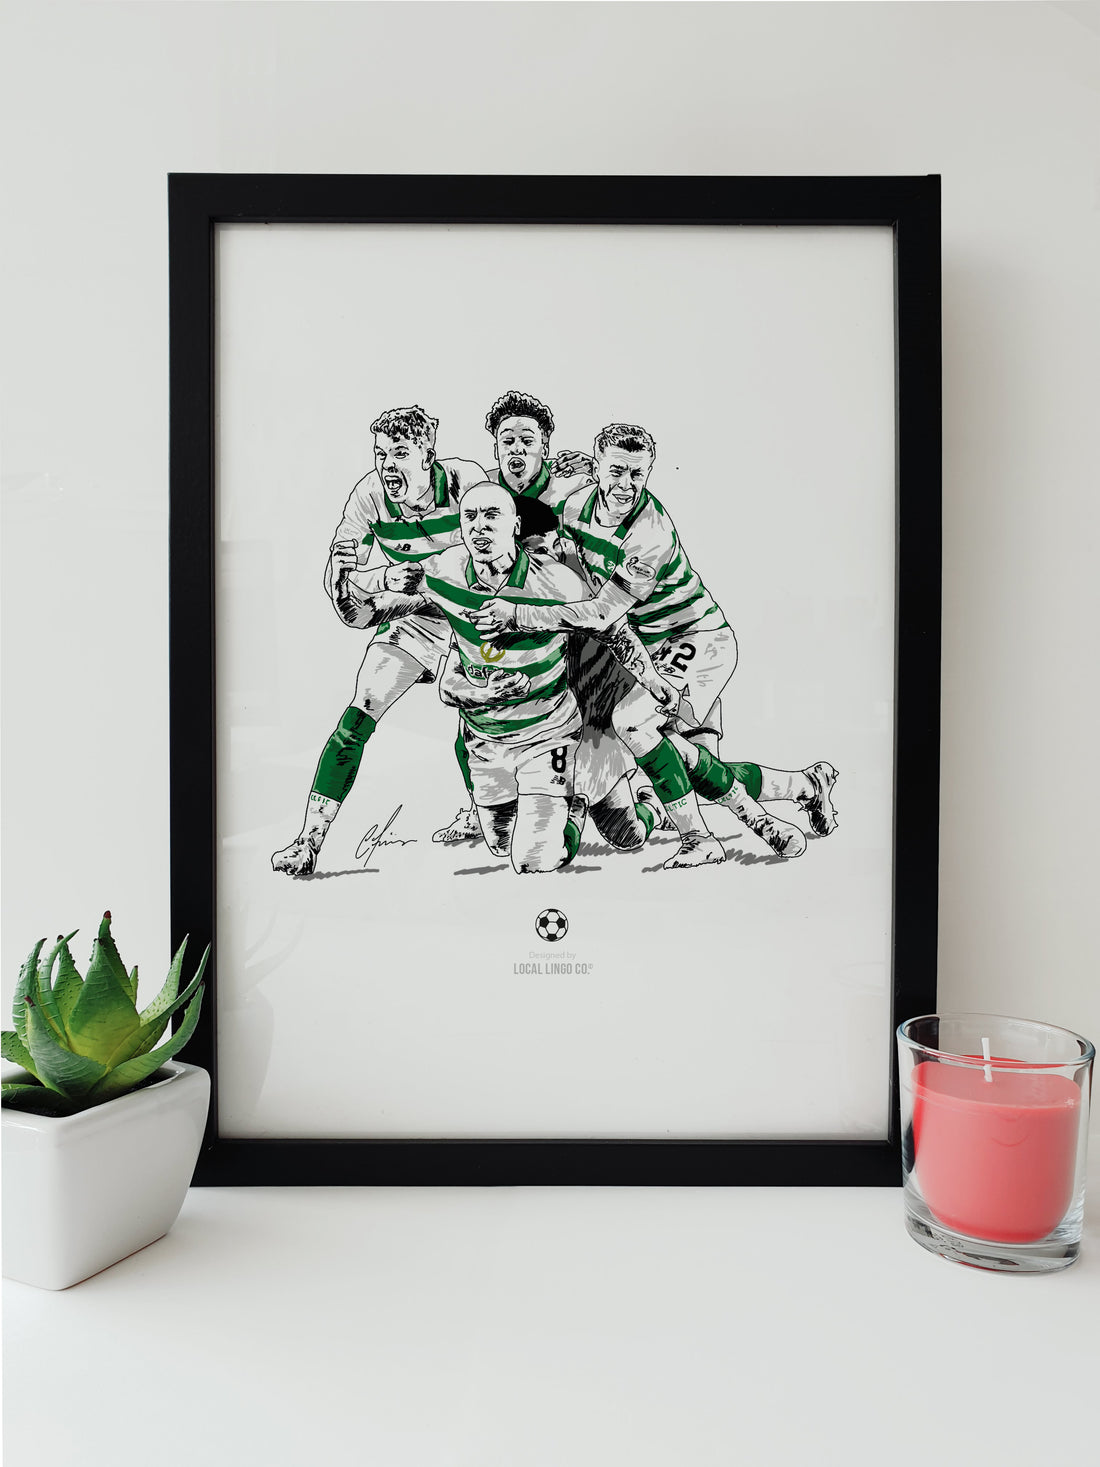 Hand-drawn illustration of Celtic FC players in celebration, capturing the joy of victory, from Local Lingo's exclusive football print collection.